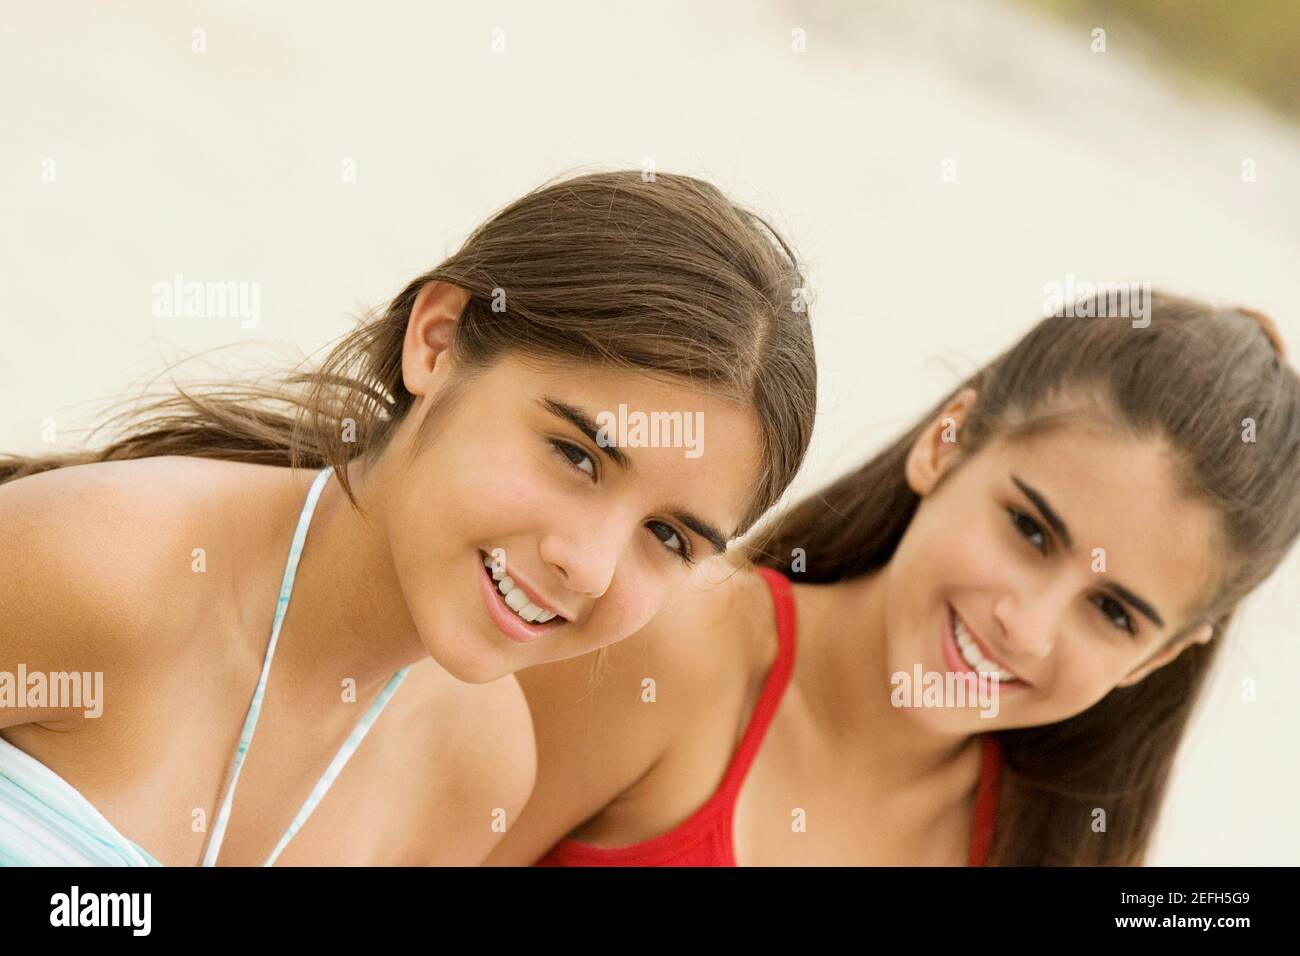 Portrait of two girls smiling Stock Photo